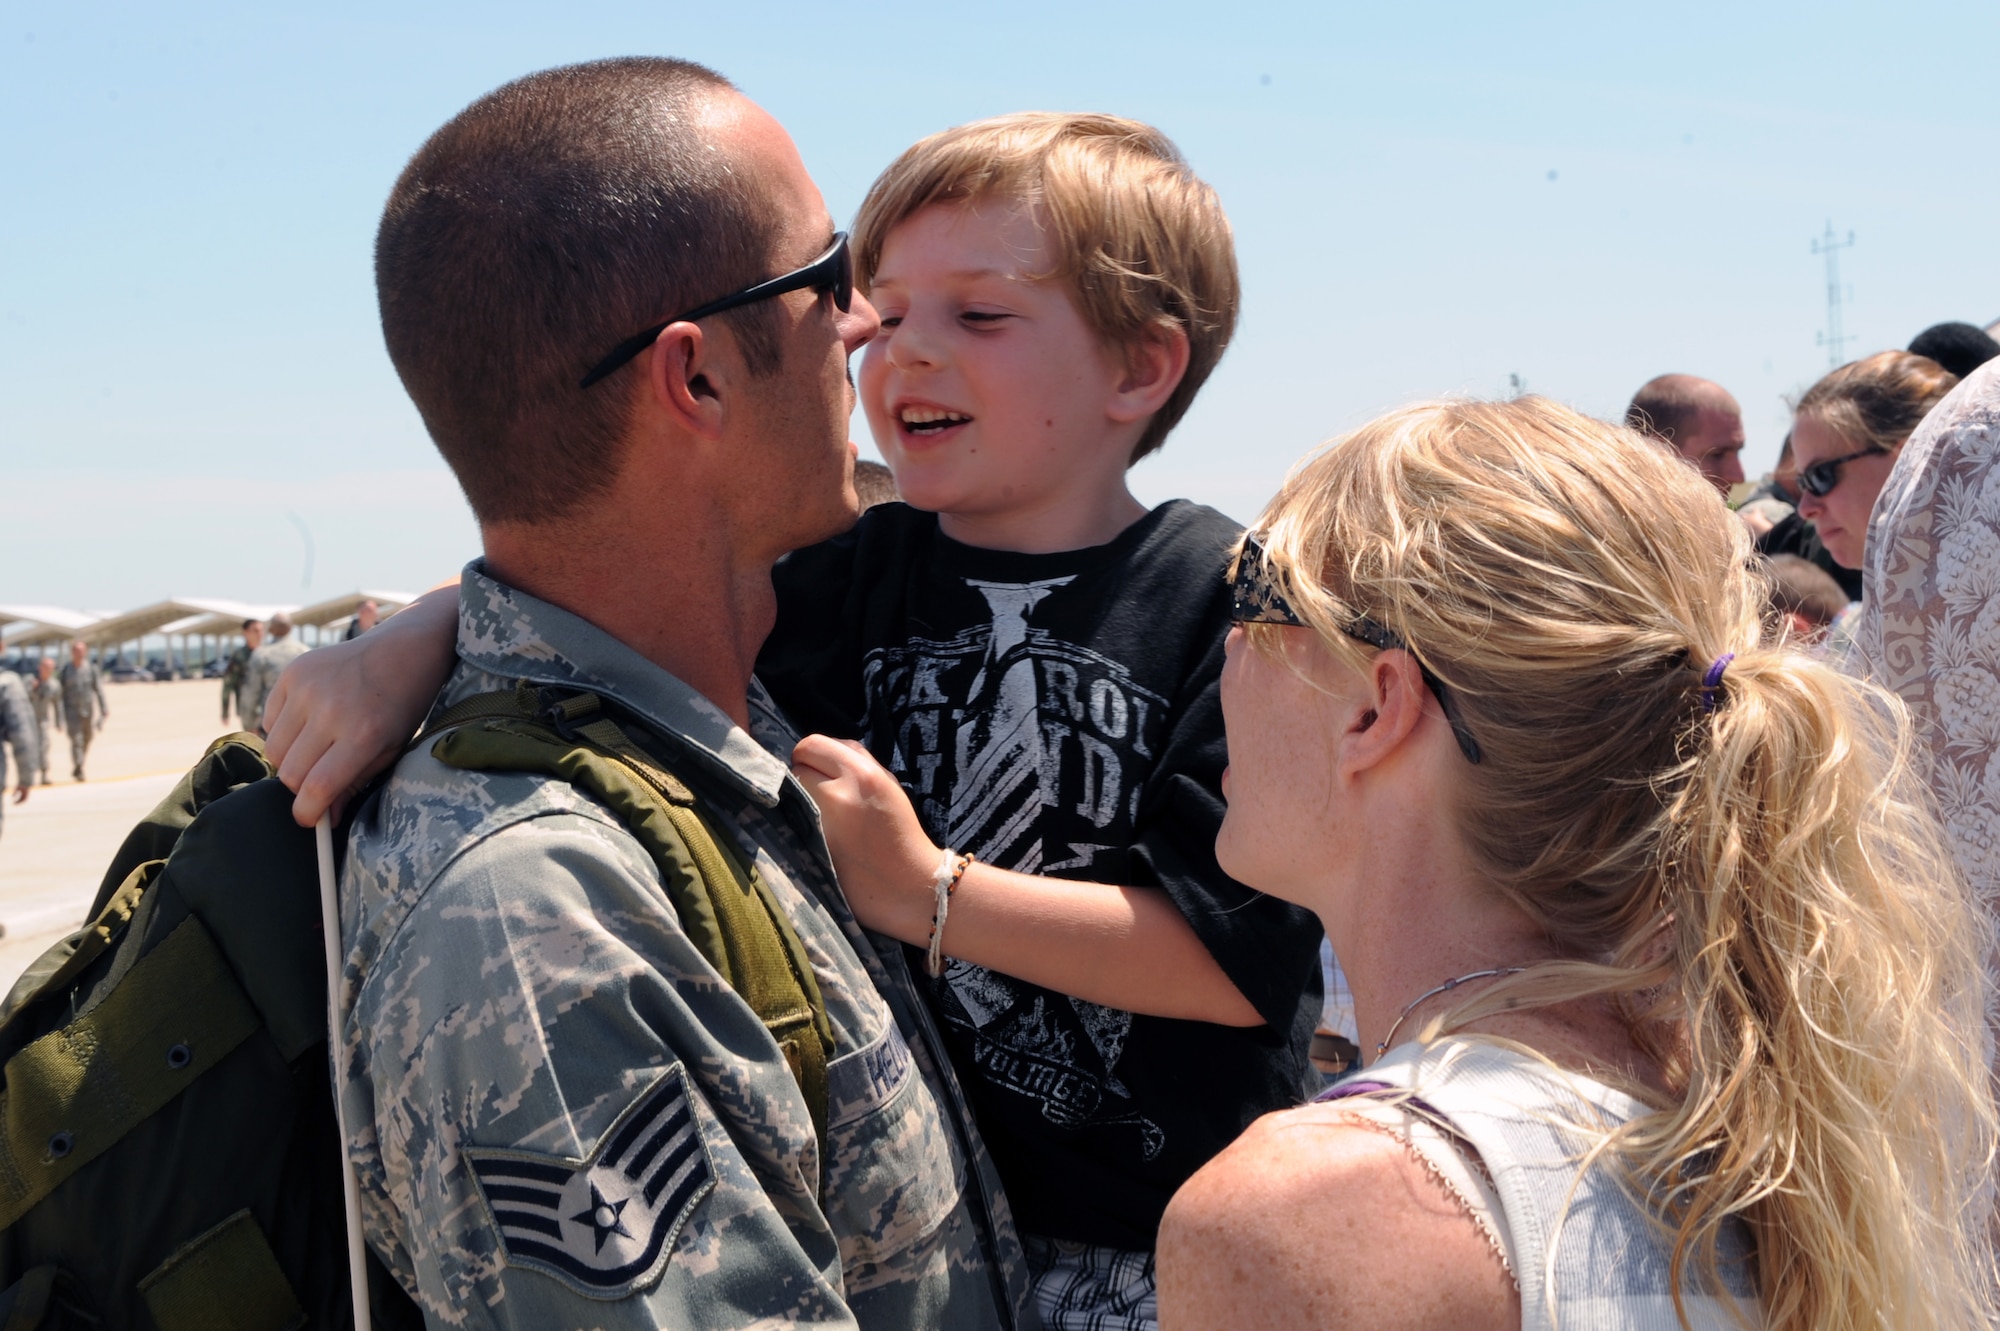 WHITEMAN AIR FORCE BASE, Mo., -- Staff Sgt. Kyle Helton, 509th Aircraft Maintenance Squadron, embraces his wife and son, June 4, after returning from a four-month deployment to Andersen AFB, Guam. More than 200 Airmen deployed in support of the B-2 Spirit's continuing bomber presence in the Pacific.
(U.S. Air Force photo/Staff Sgt. Jason Huddleston)

